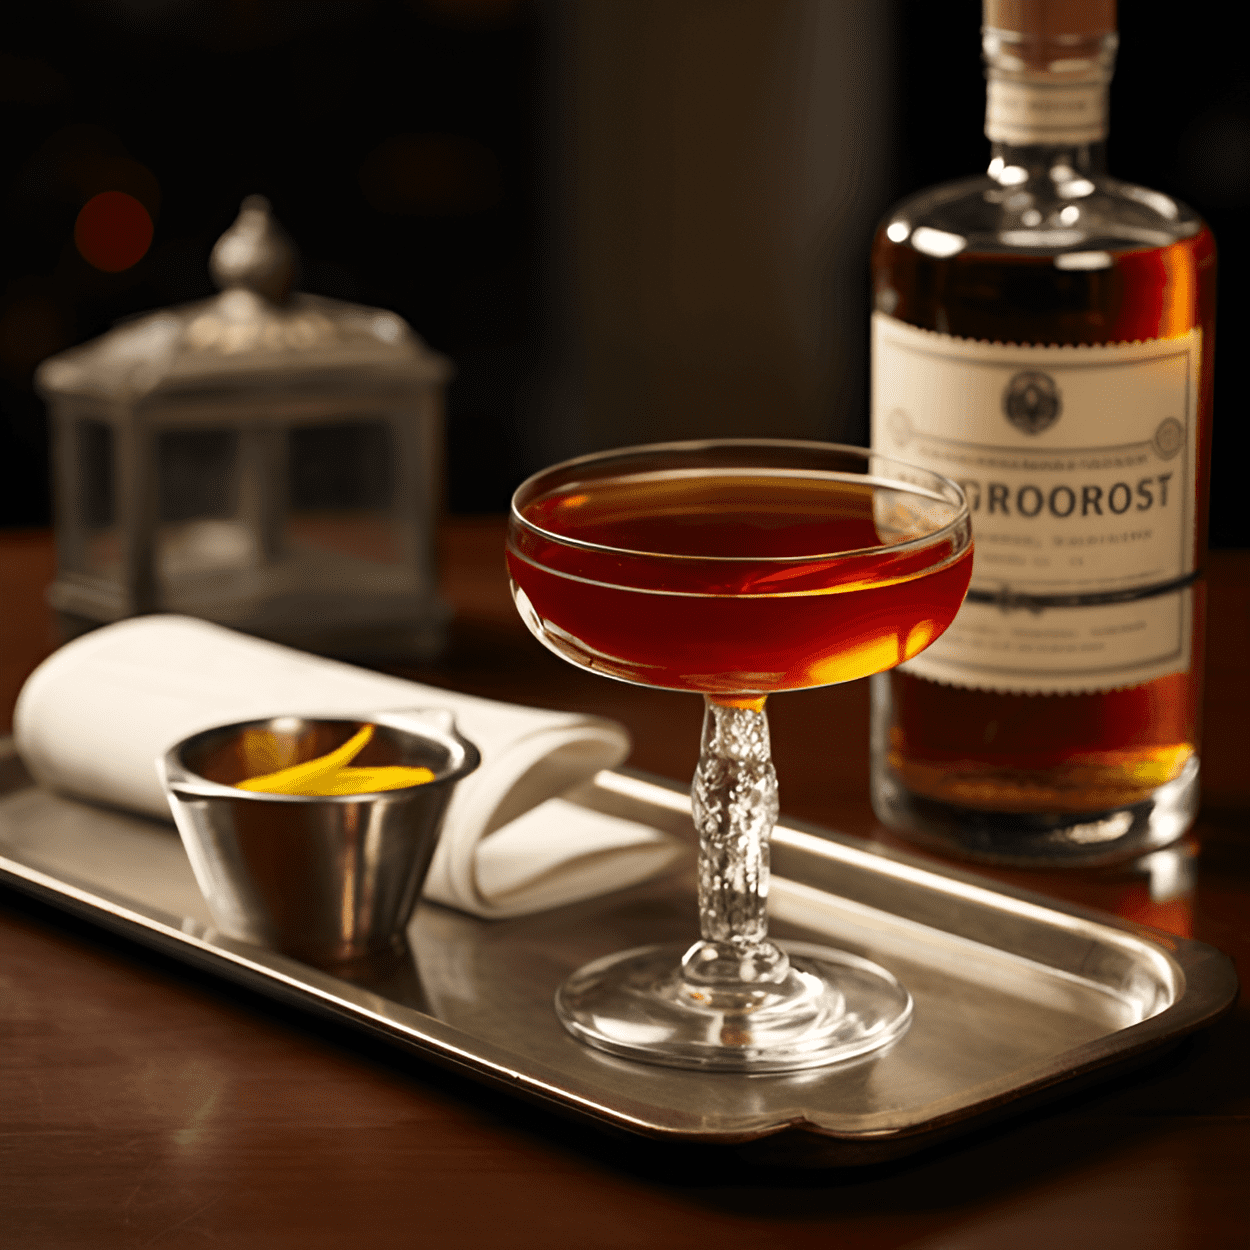 Roosevelt Cocktail Recipe - The Roosevelt cocktail has a well-balanced taste with a hint of sweetness and a touch of sourness. It is a strong and bold drink with a smooth finish.